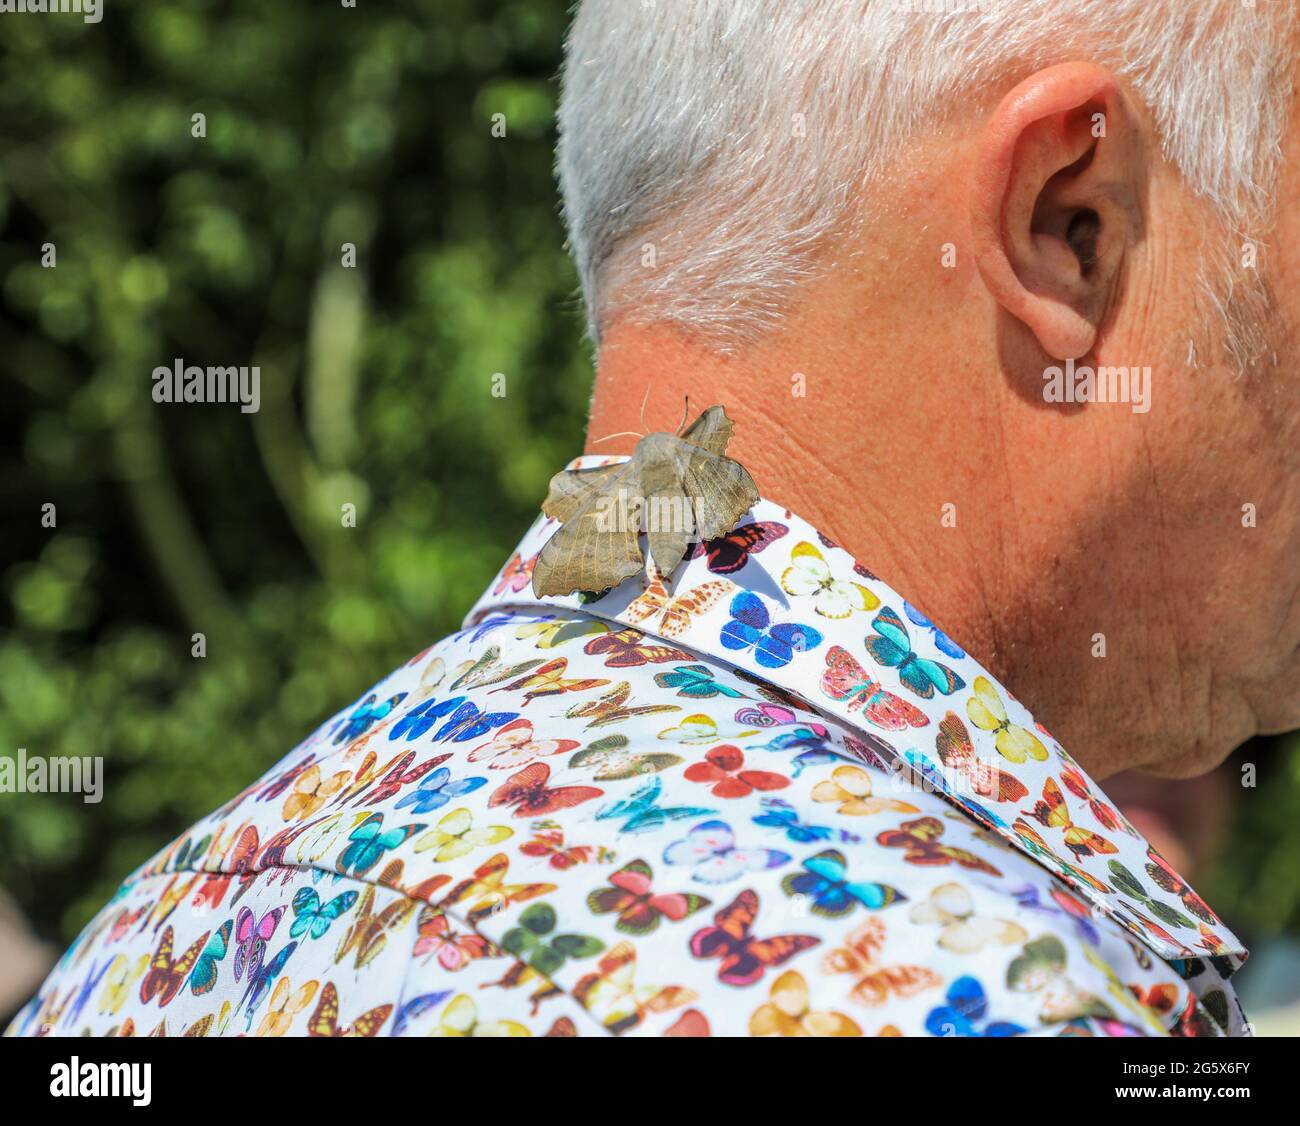 An Eyed hawk-moth resting on a man's collar and neck of a shirt with a butterfly pattern, Hickling Broad, Norfolk, England, UK Stock Photo